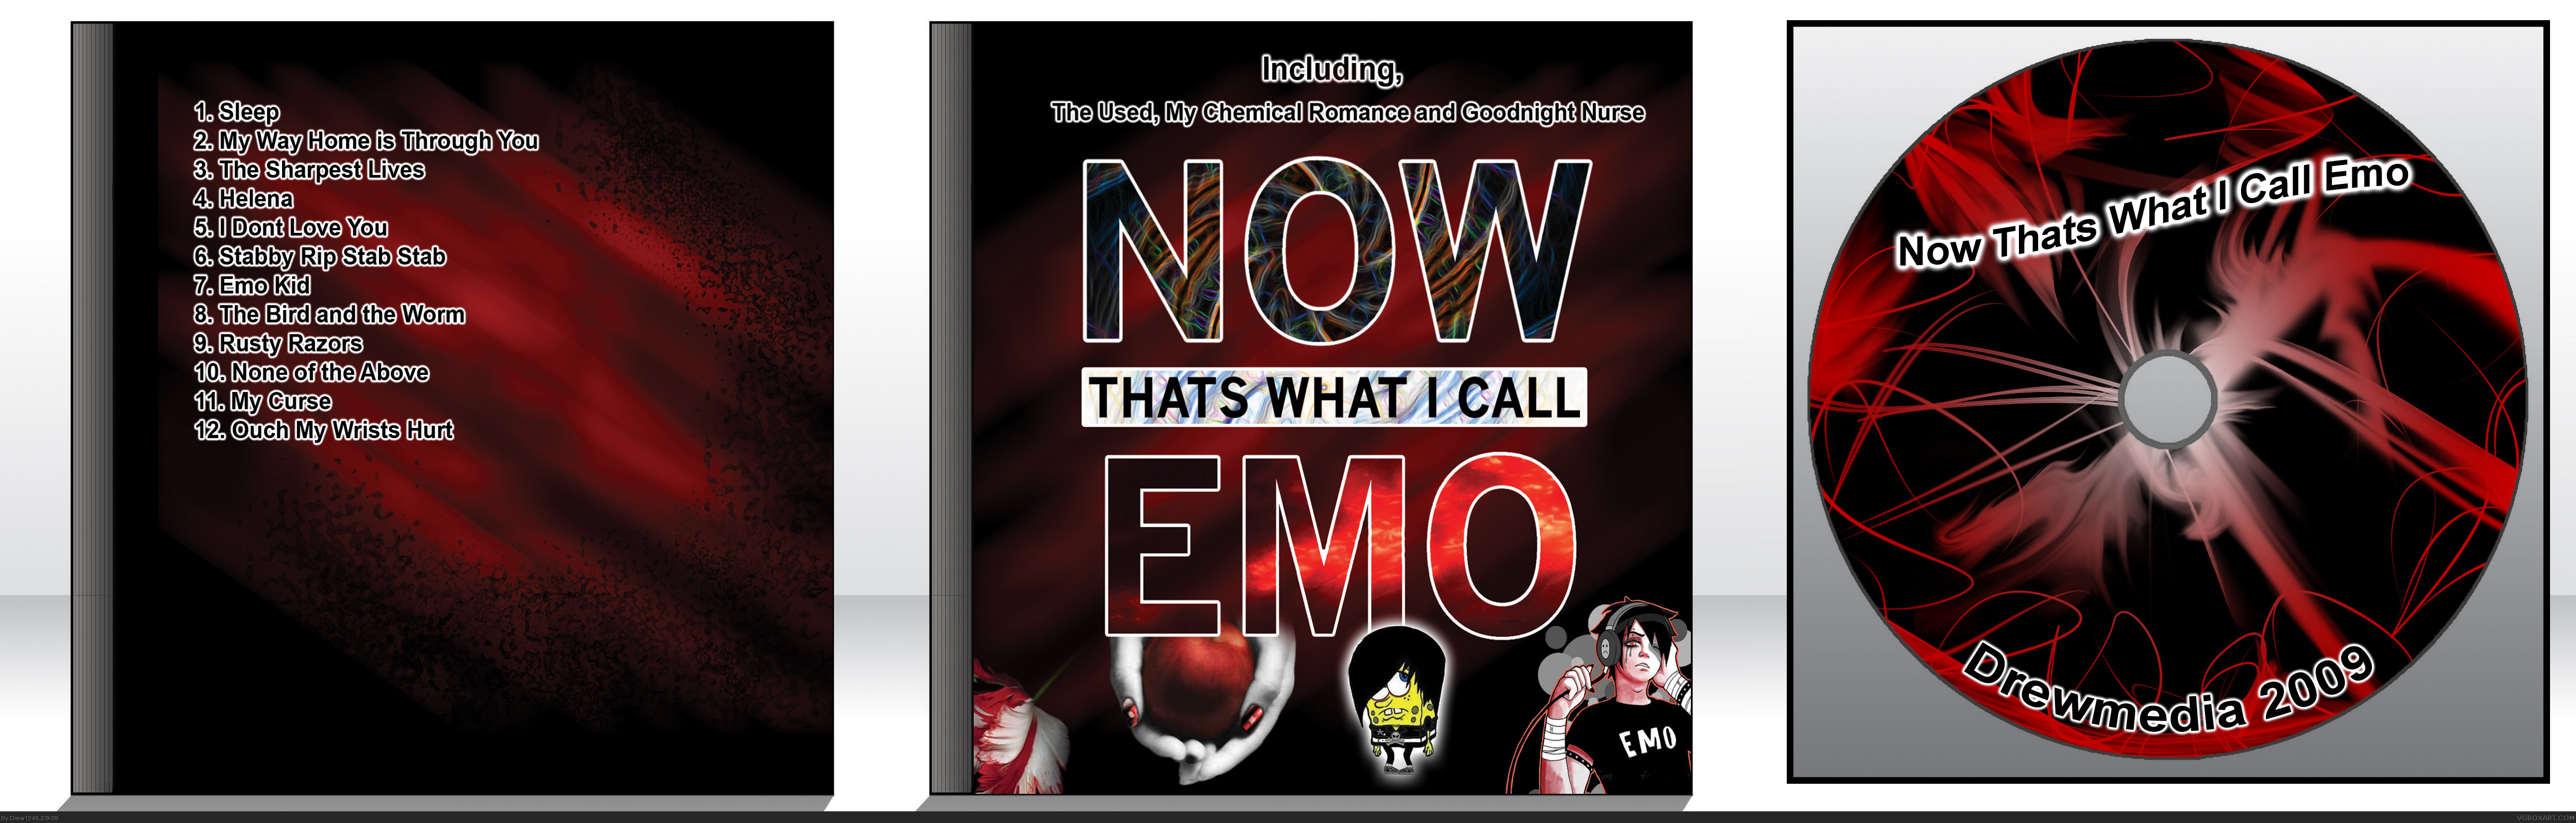 Now Thats What I Call Emo box cover